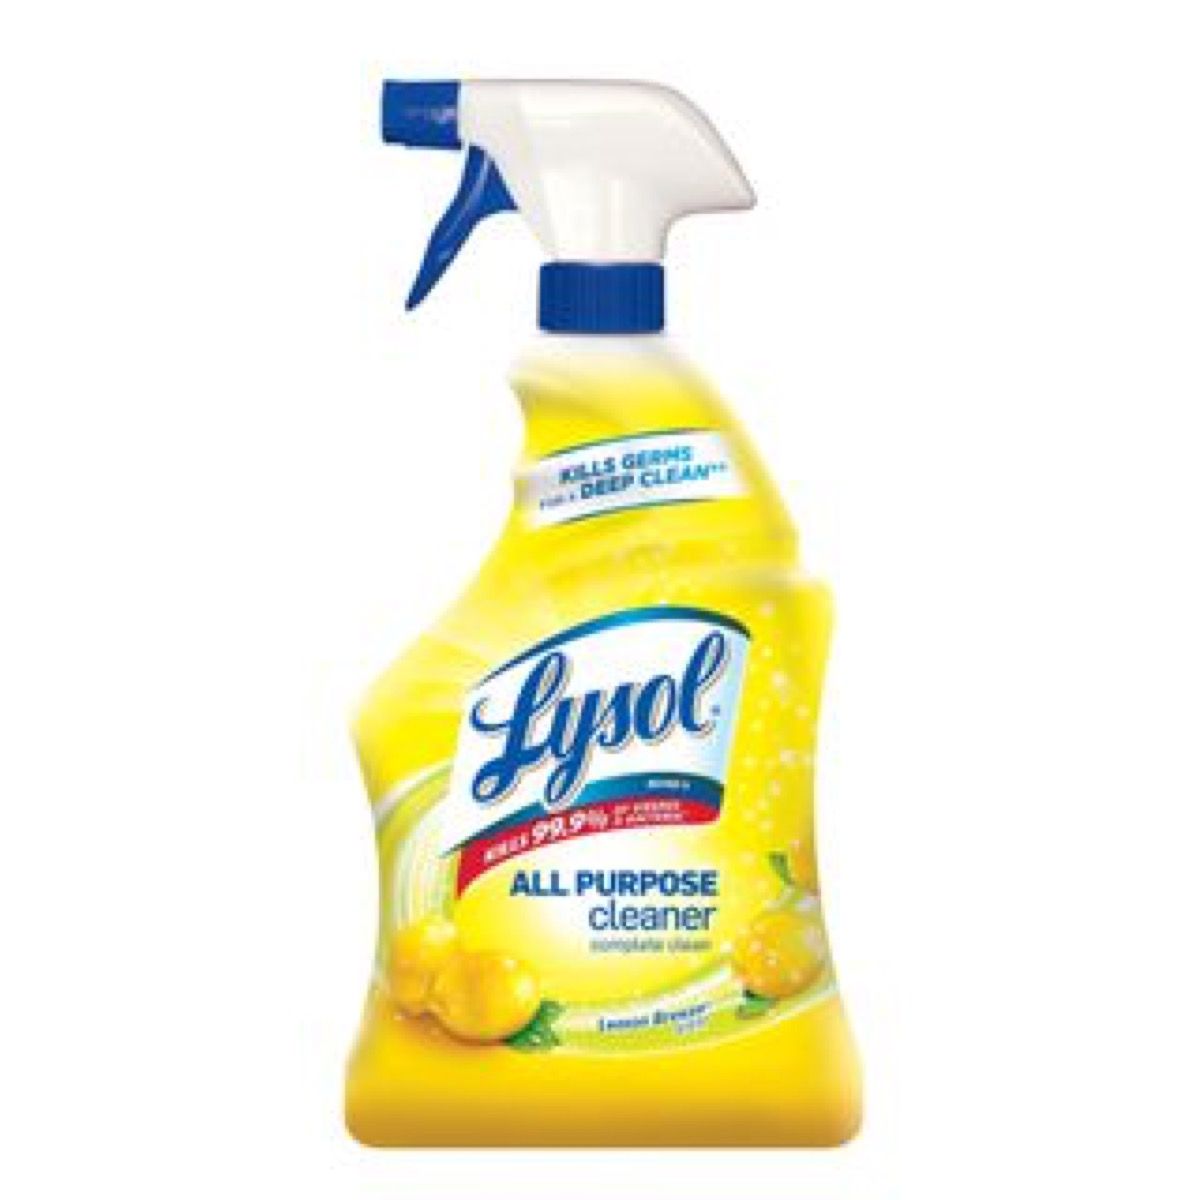 Lysol Brand All Purpose Cleaner